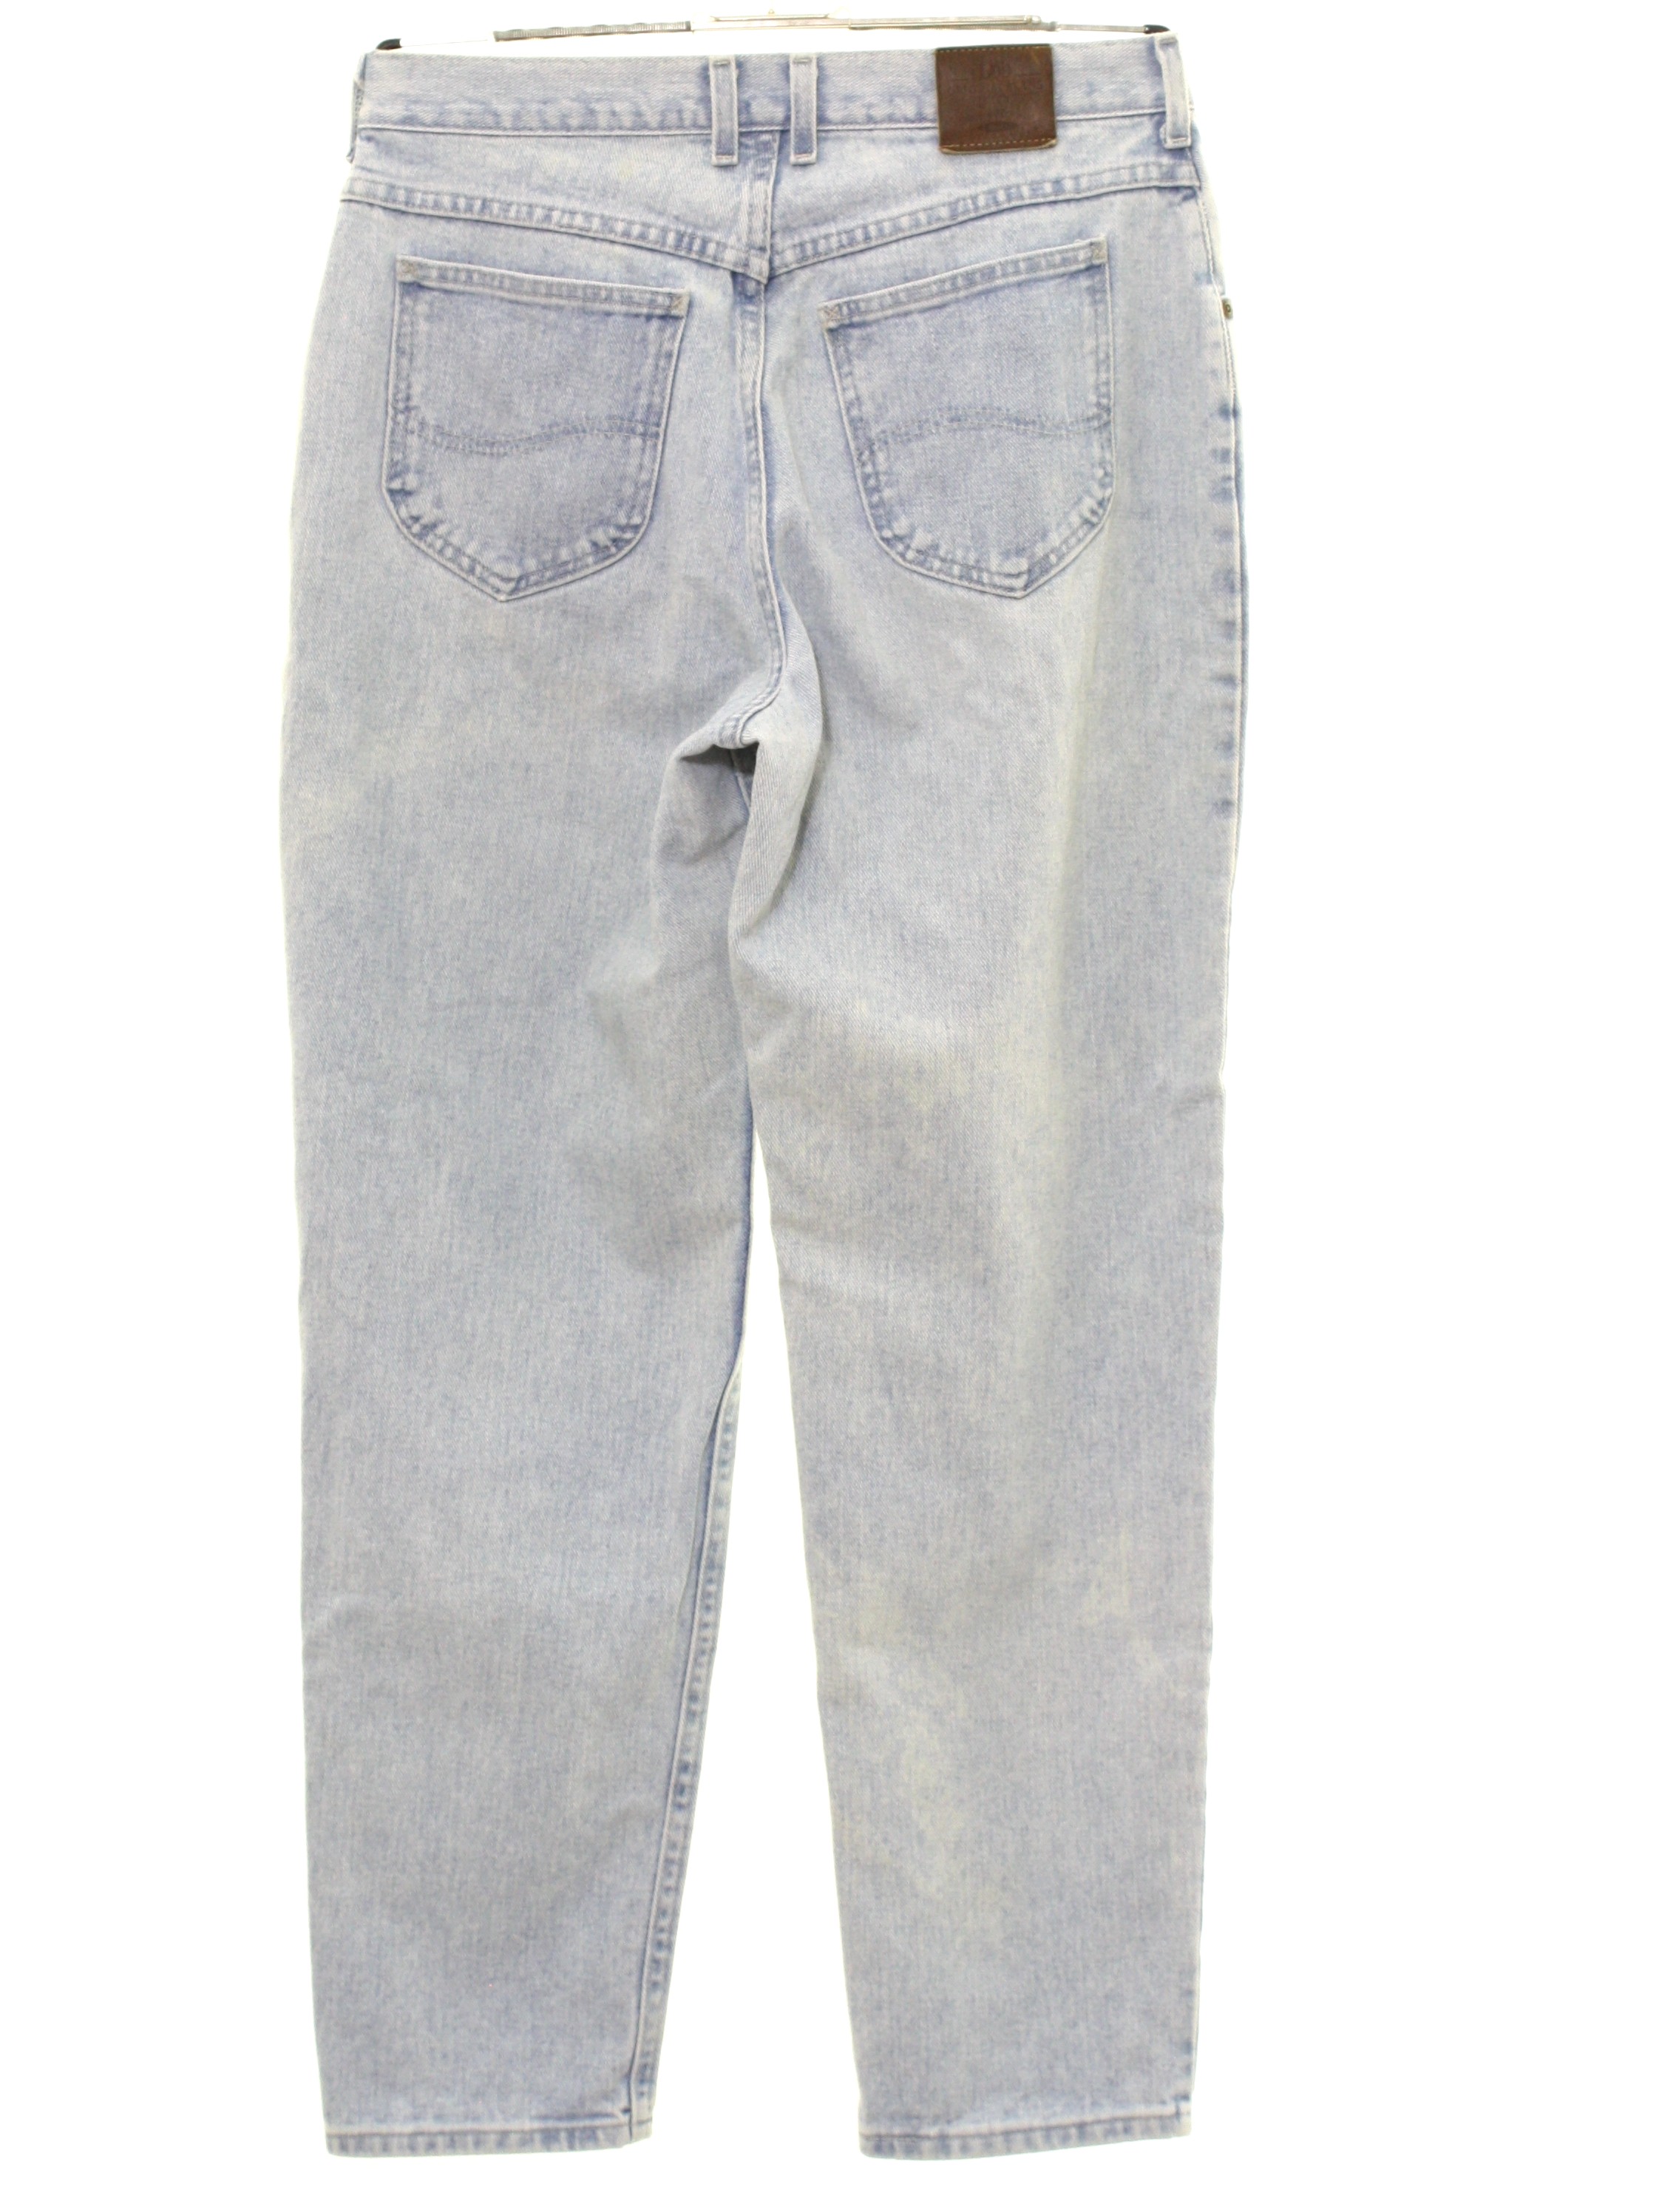 Retro 1980's Pants (Lee) : 80s -Lee- Womens slightly faded and worn ...